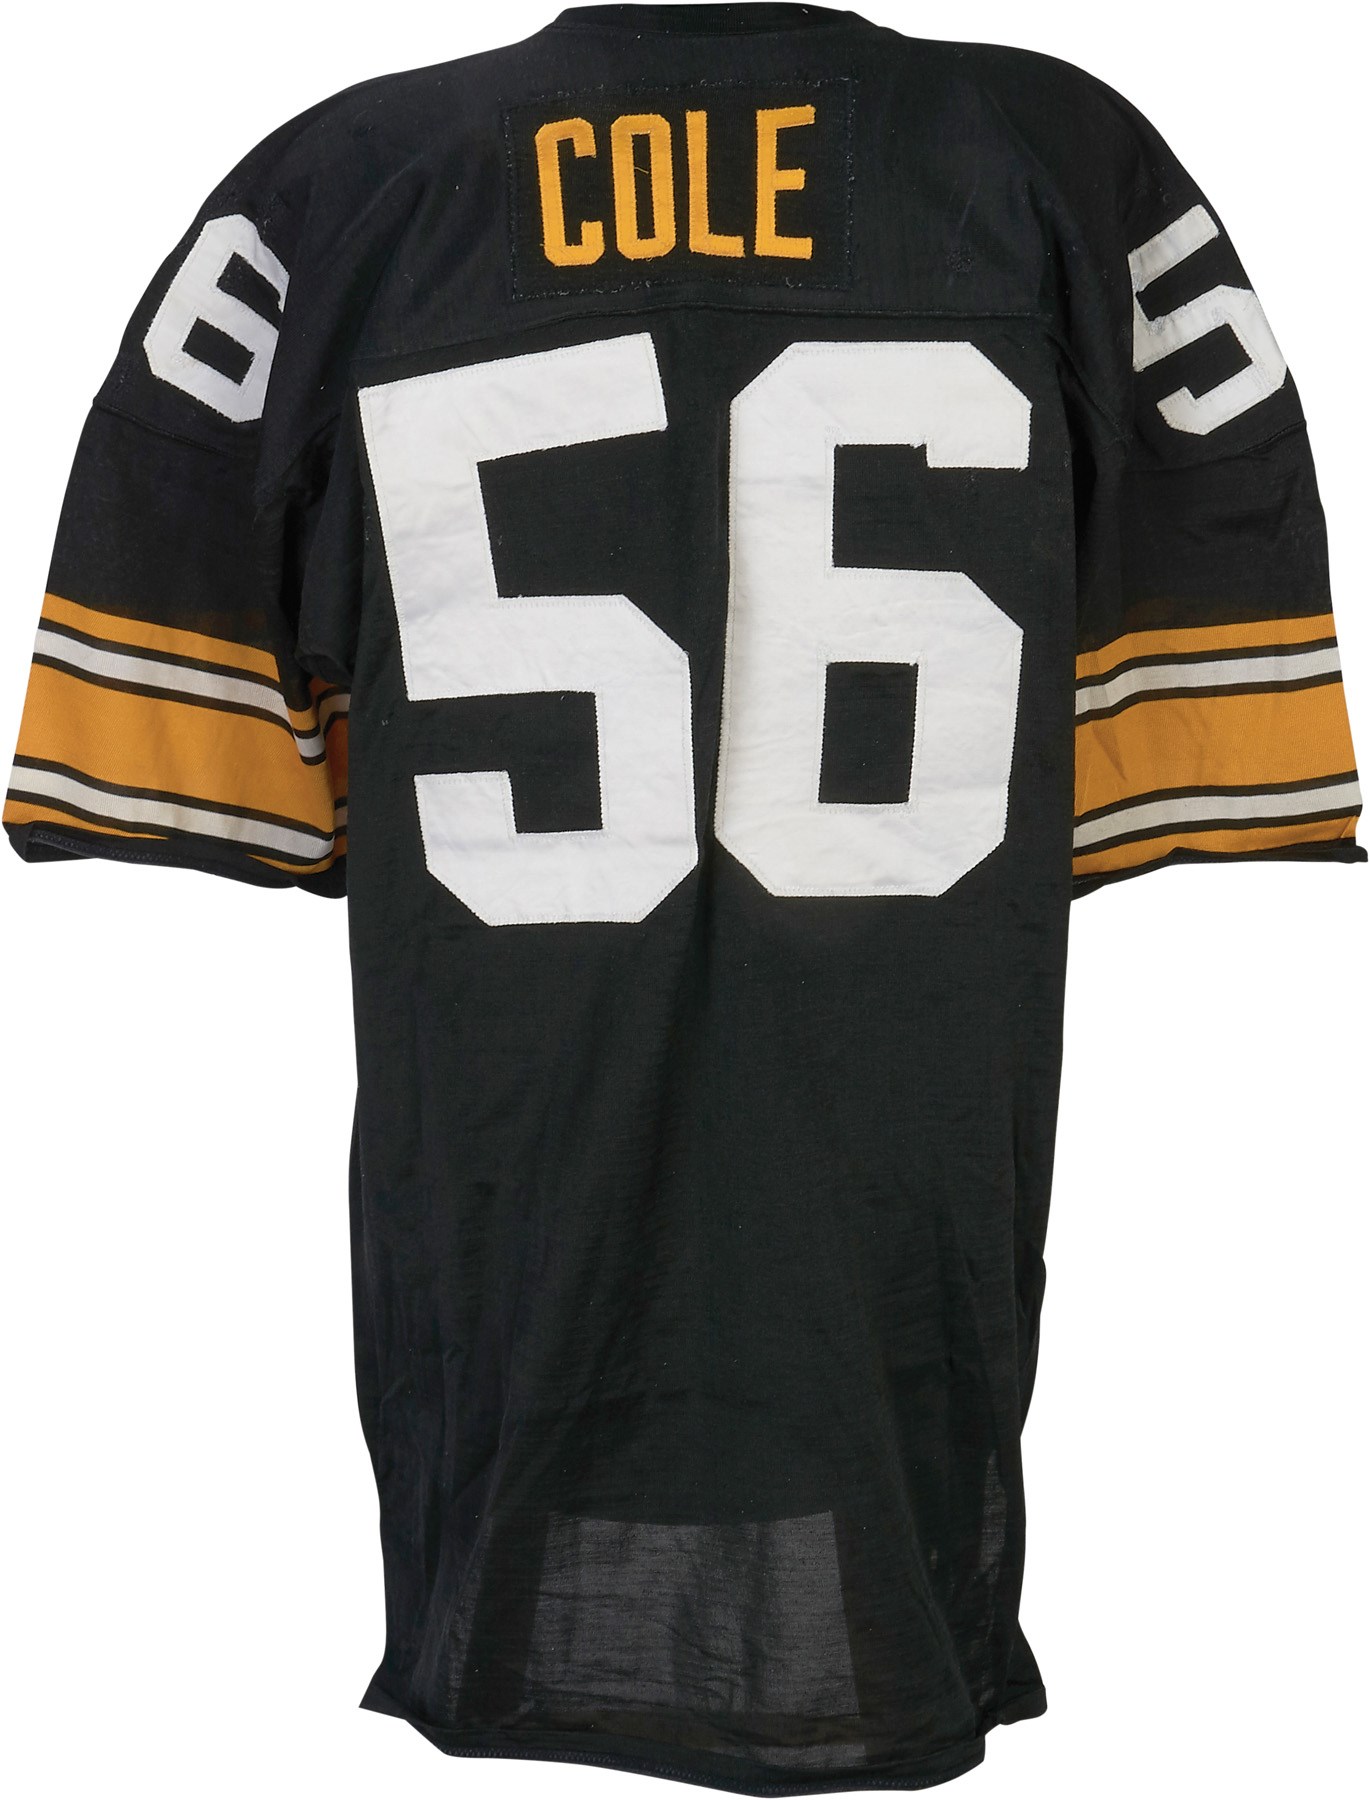 The Pittsburgh Steelers Game Worn Jersey Archive - 1980 Robin Cole Pittsburgh Steelers Game Worn Jersey (Photo-Matched to 1981 Topps)